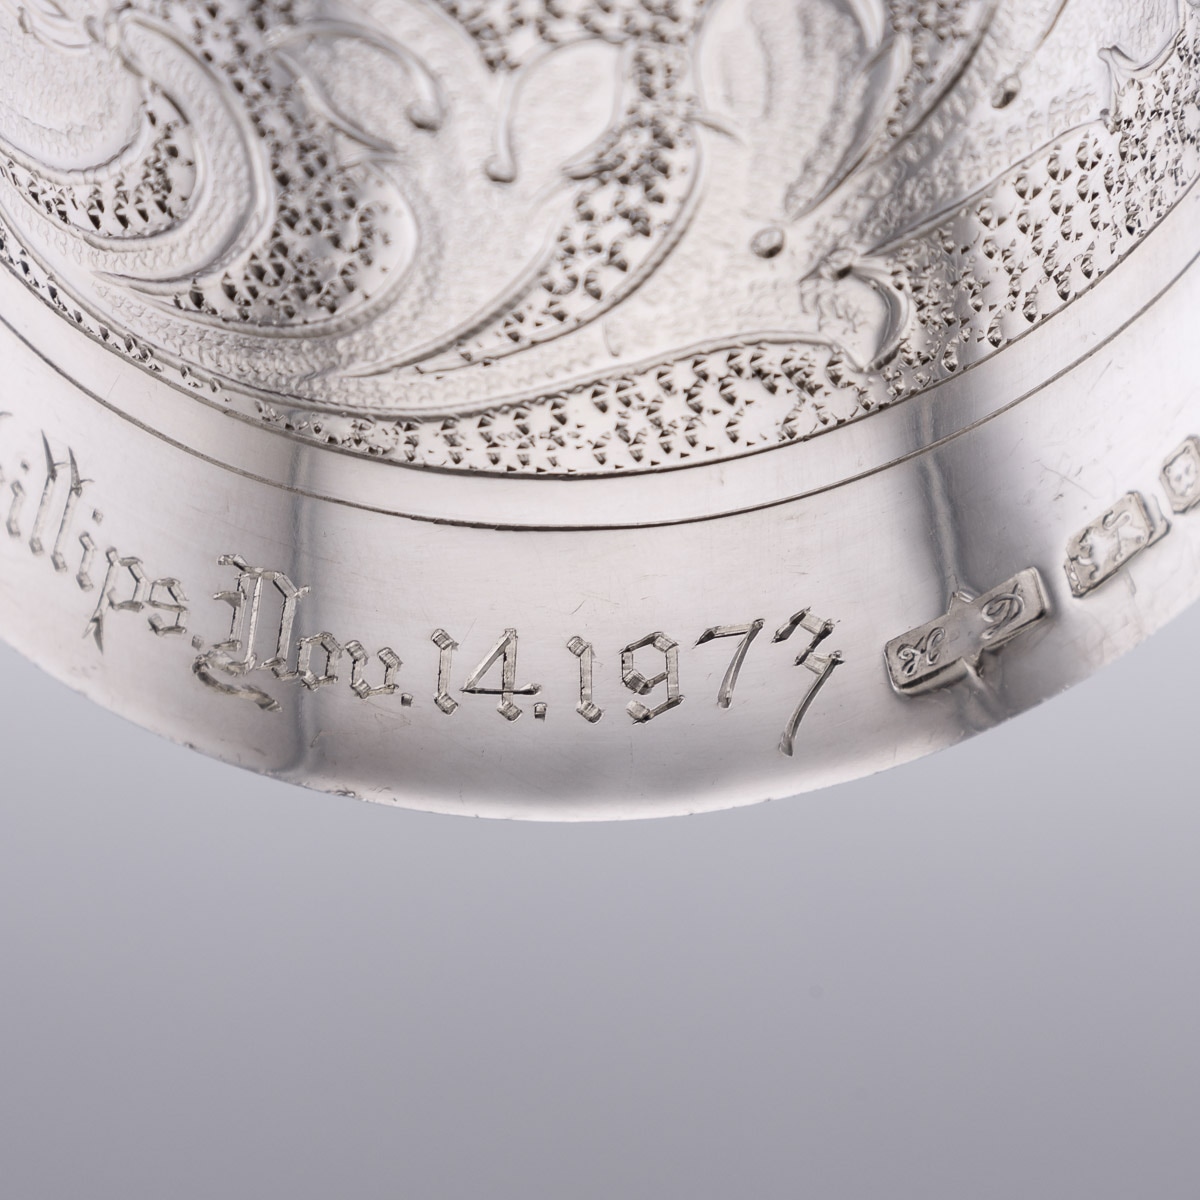 A ROYAL WEDDING SOLID STERLING SILVER NOVELTY WAGER CUP, LONDON, C. 1973 - Image 16 of 23